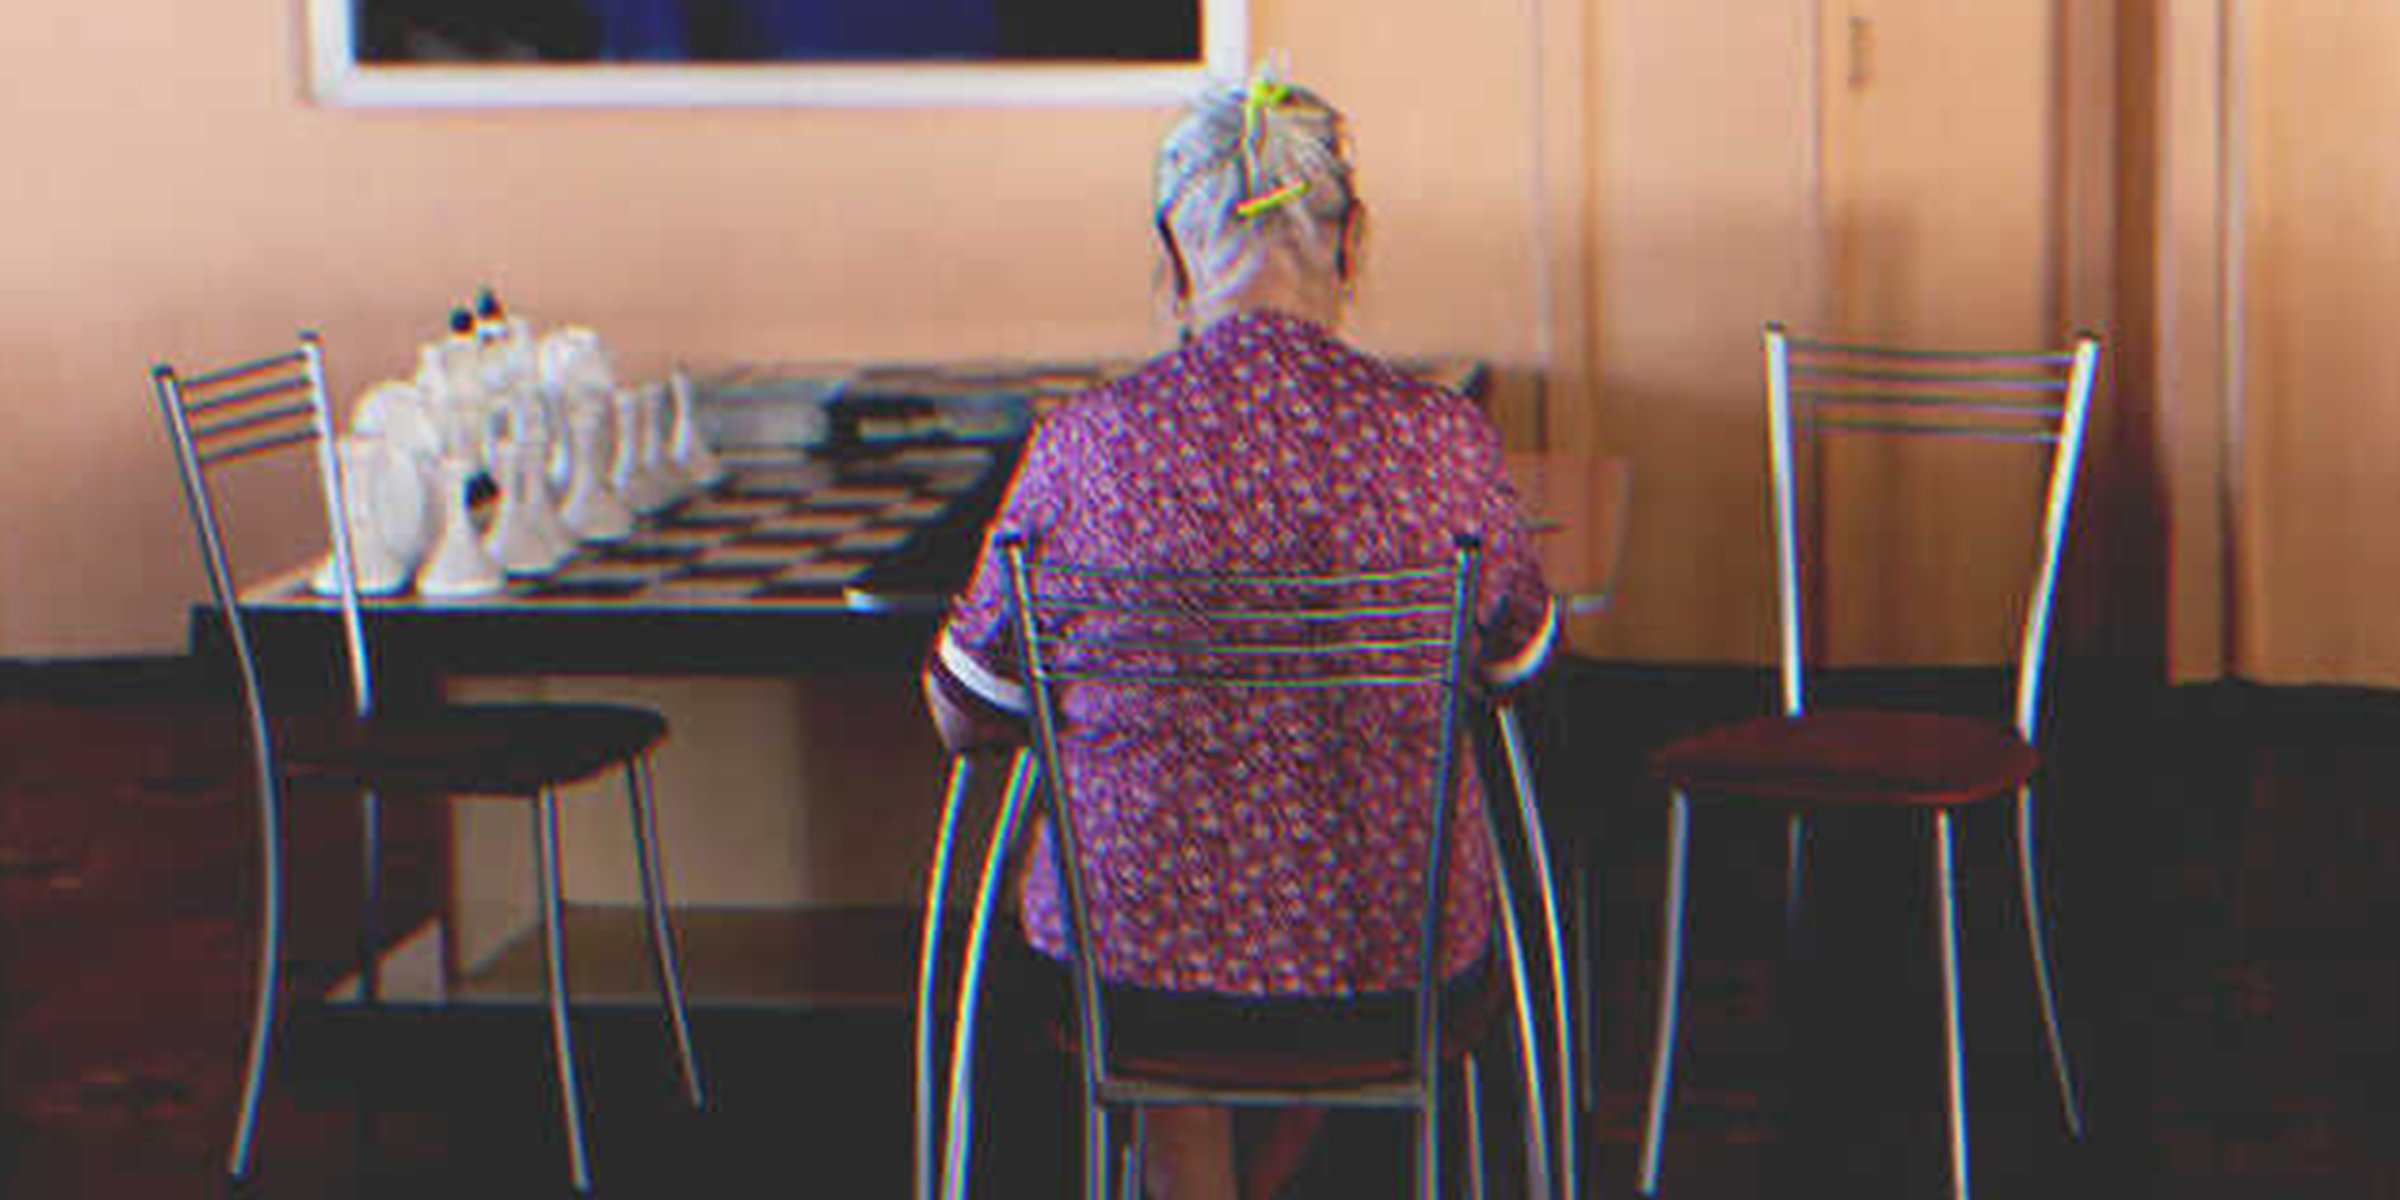 An old woman sitting alone in front of a table | Source: Shutterstock